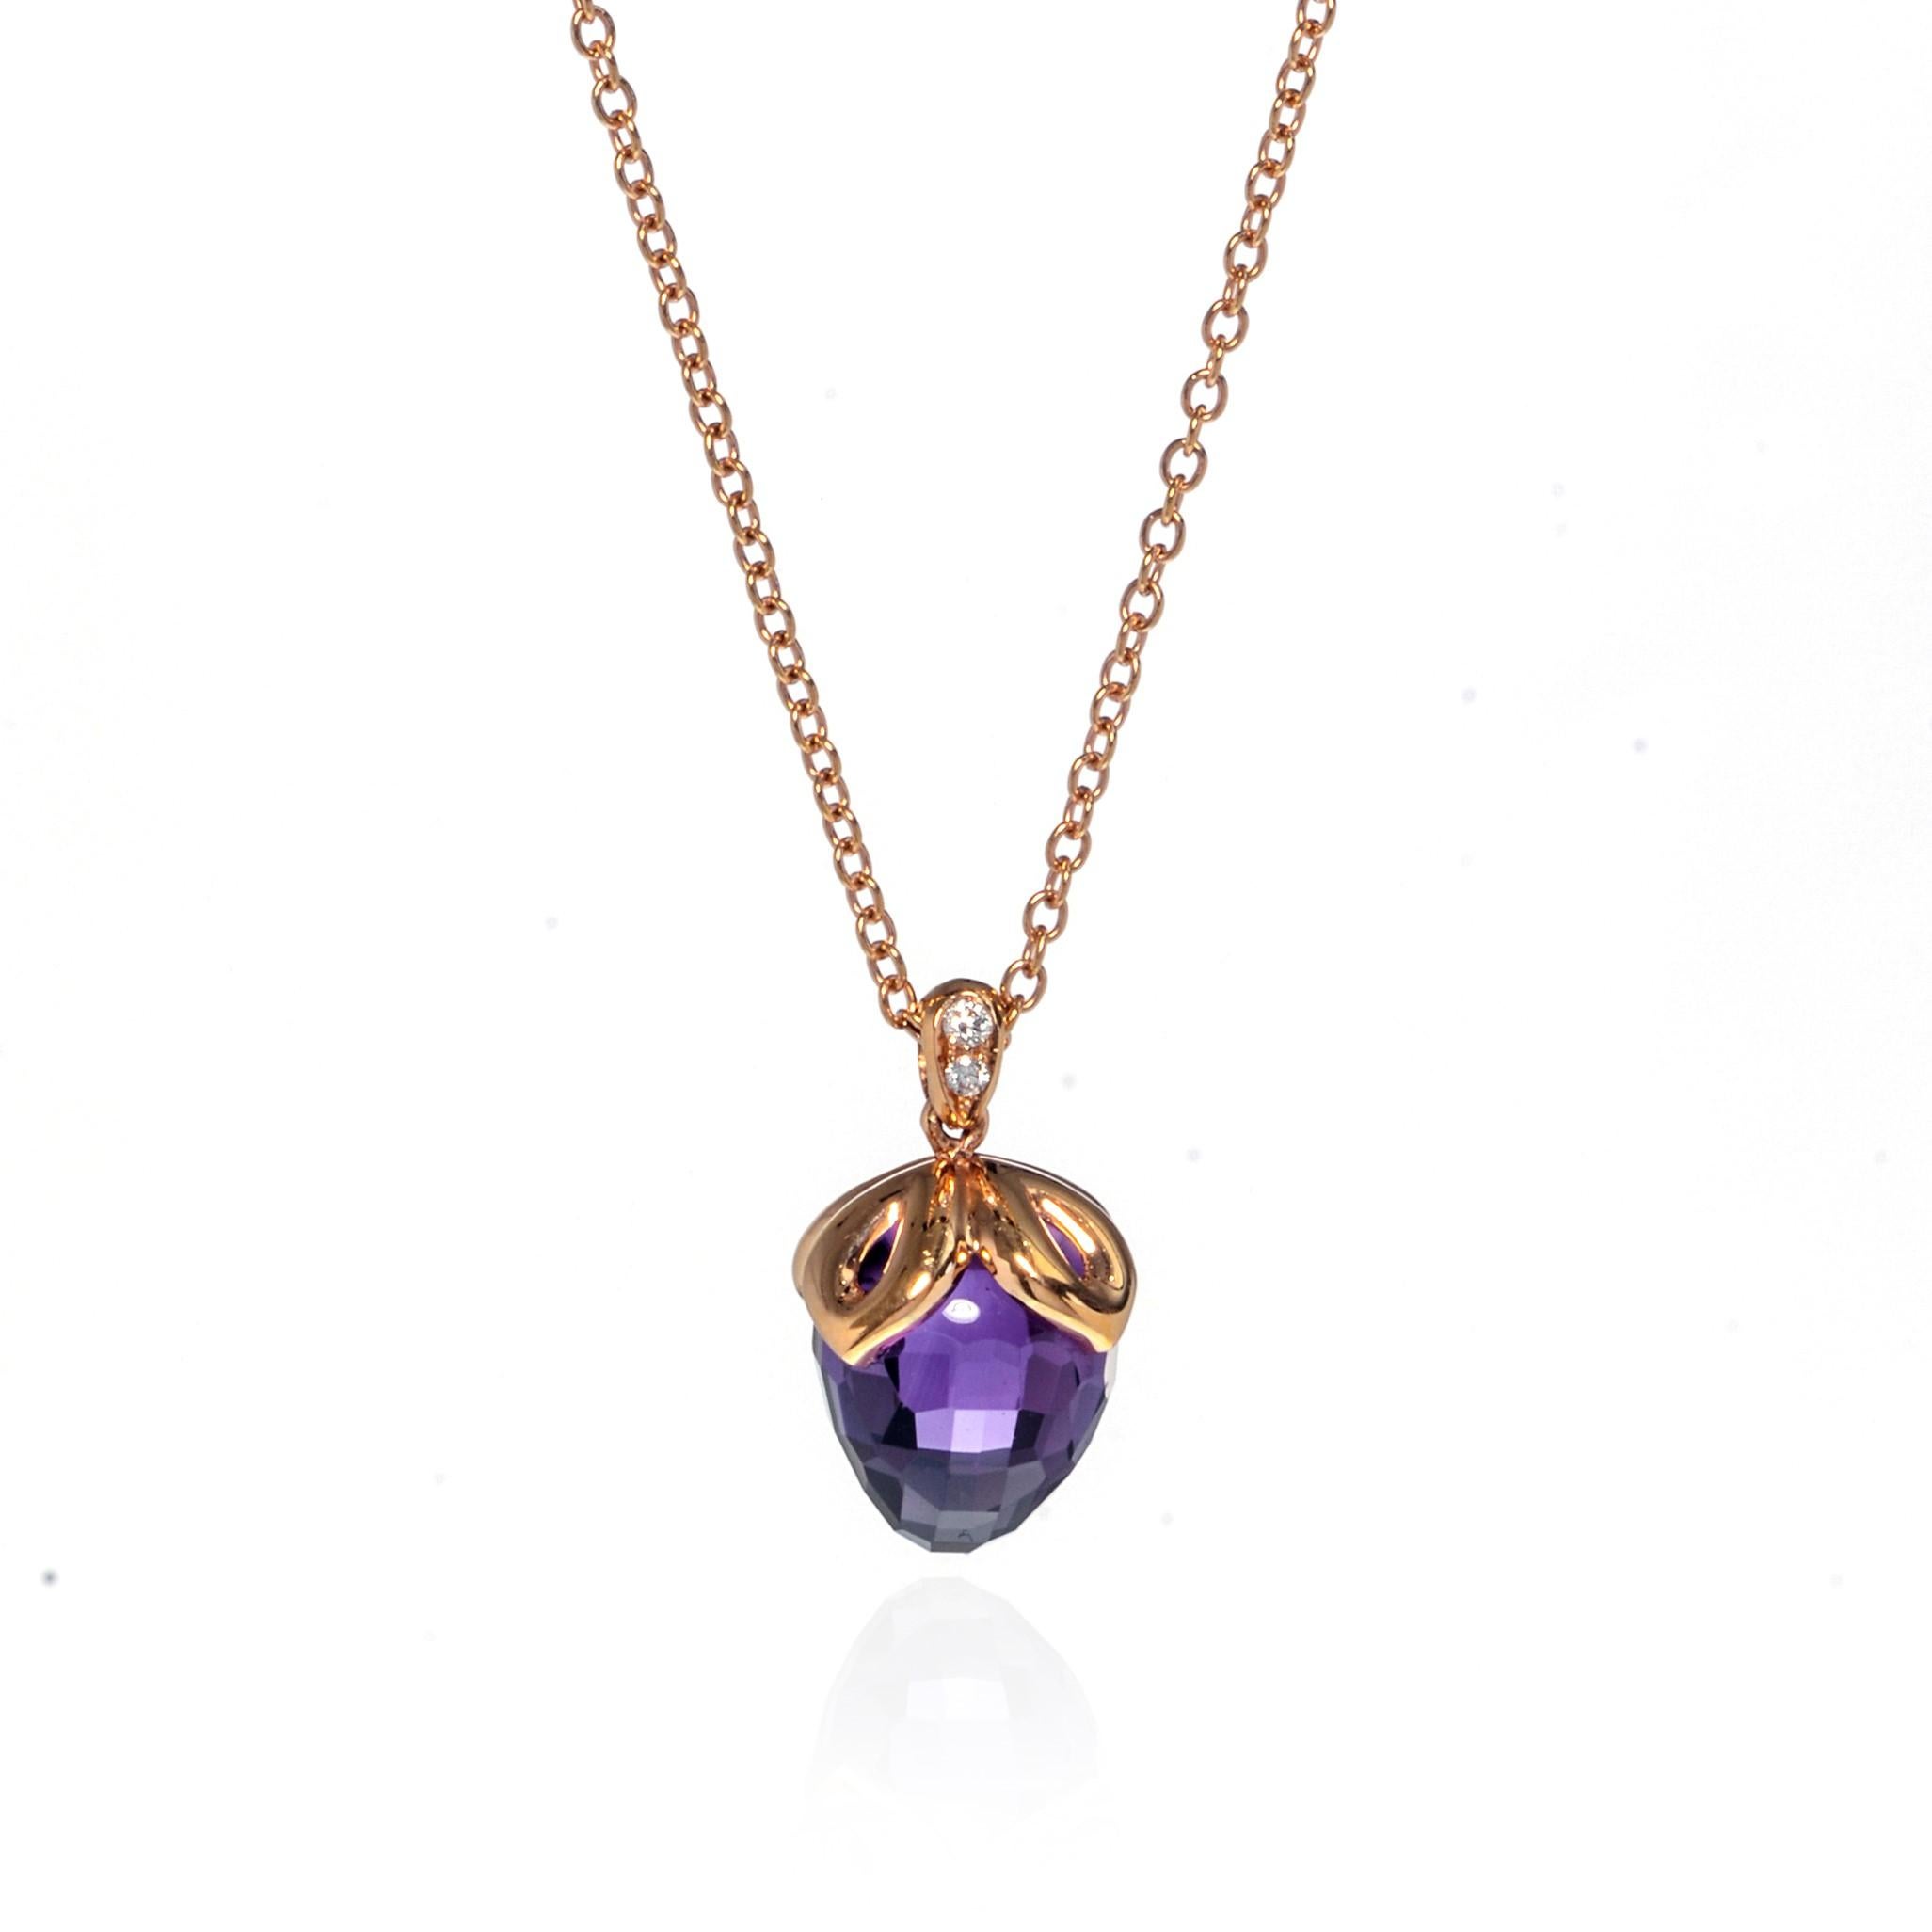 This beautiful purple Amethyst & diamond pendant necklace is crafted in 18k rose gold. Bail is set with tiny diamonds that are 0.03cttw. Amethyst weight: 7.80cts. Pendant size: 16.00mm. Chain length: 17.00 inches. Comes with box and certificate. 